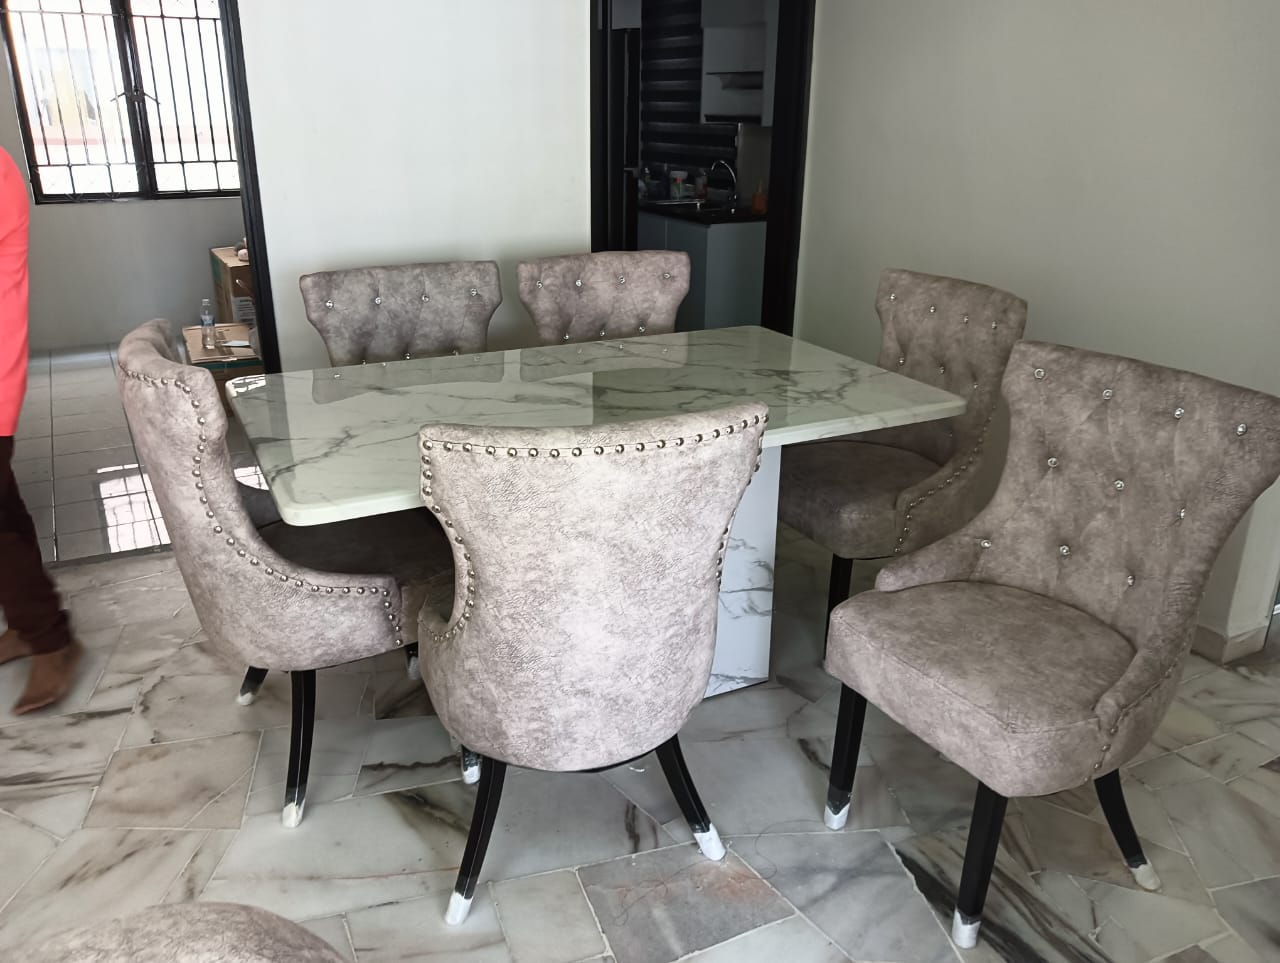 Elegant Butterfly Marble Dining Set with Luxurious Velvet Chairs